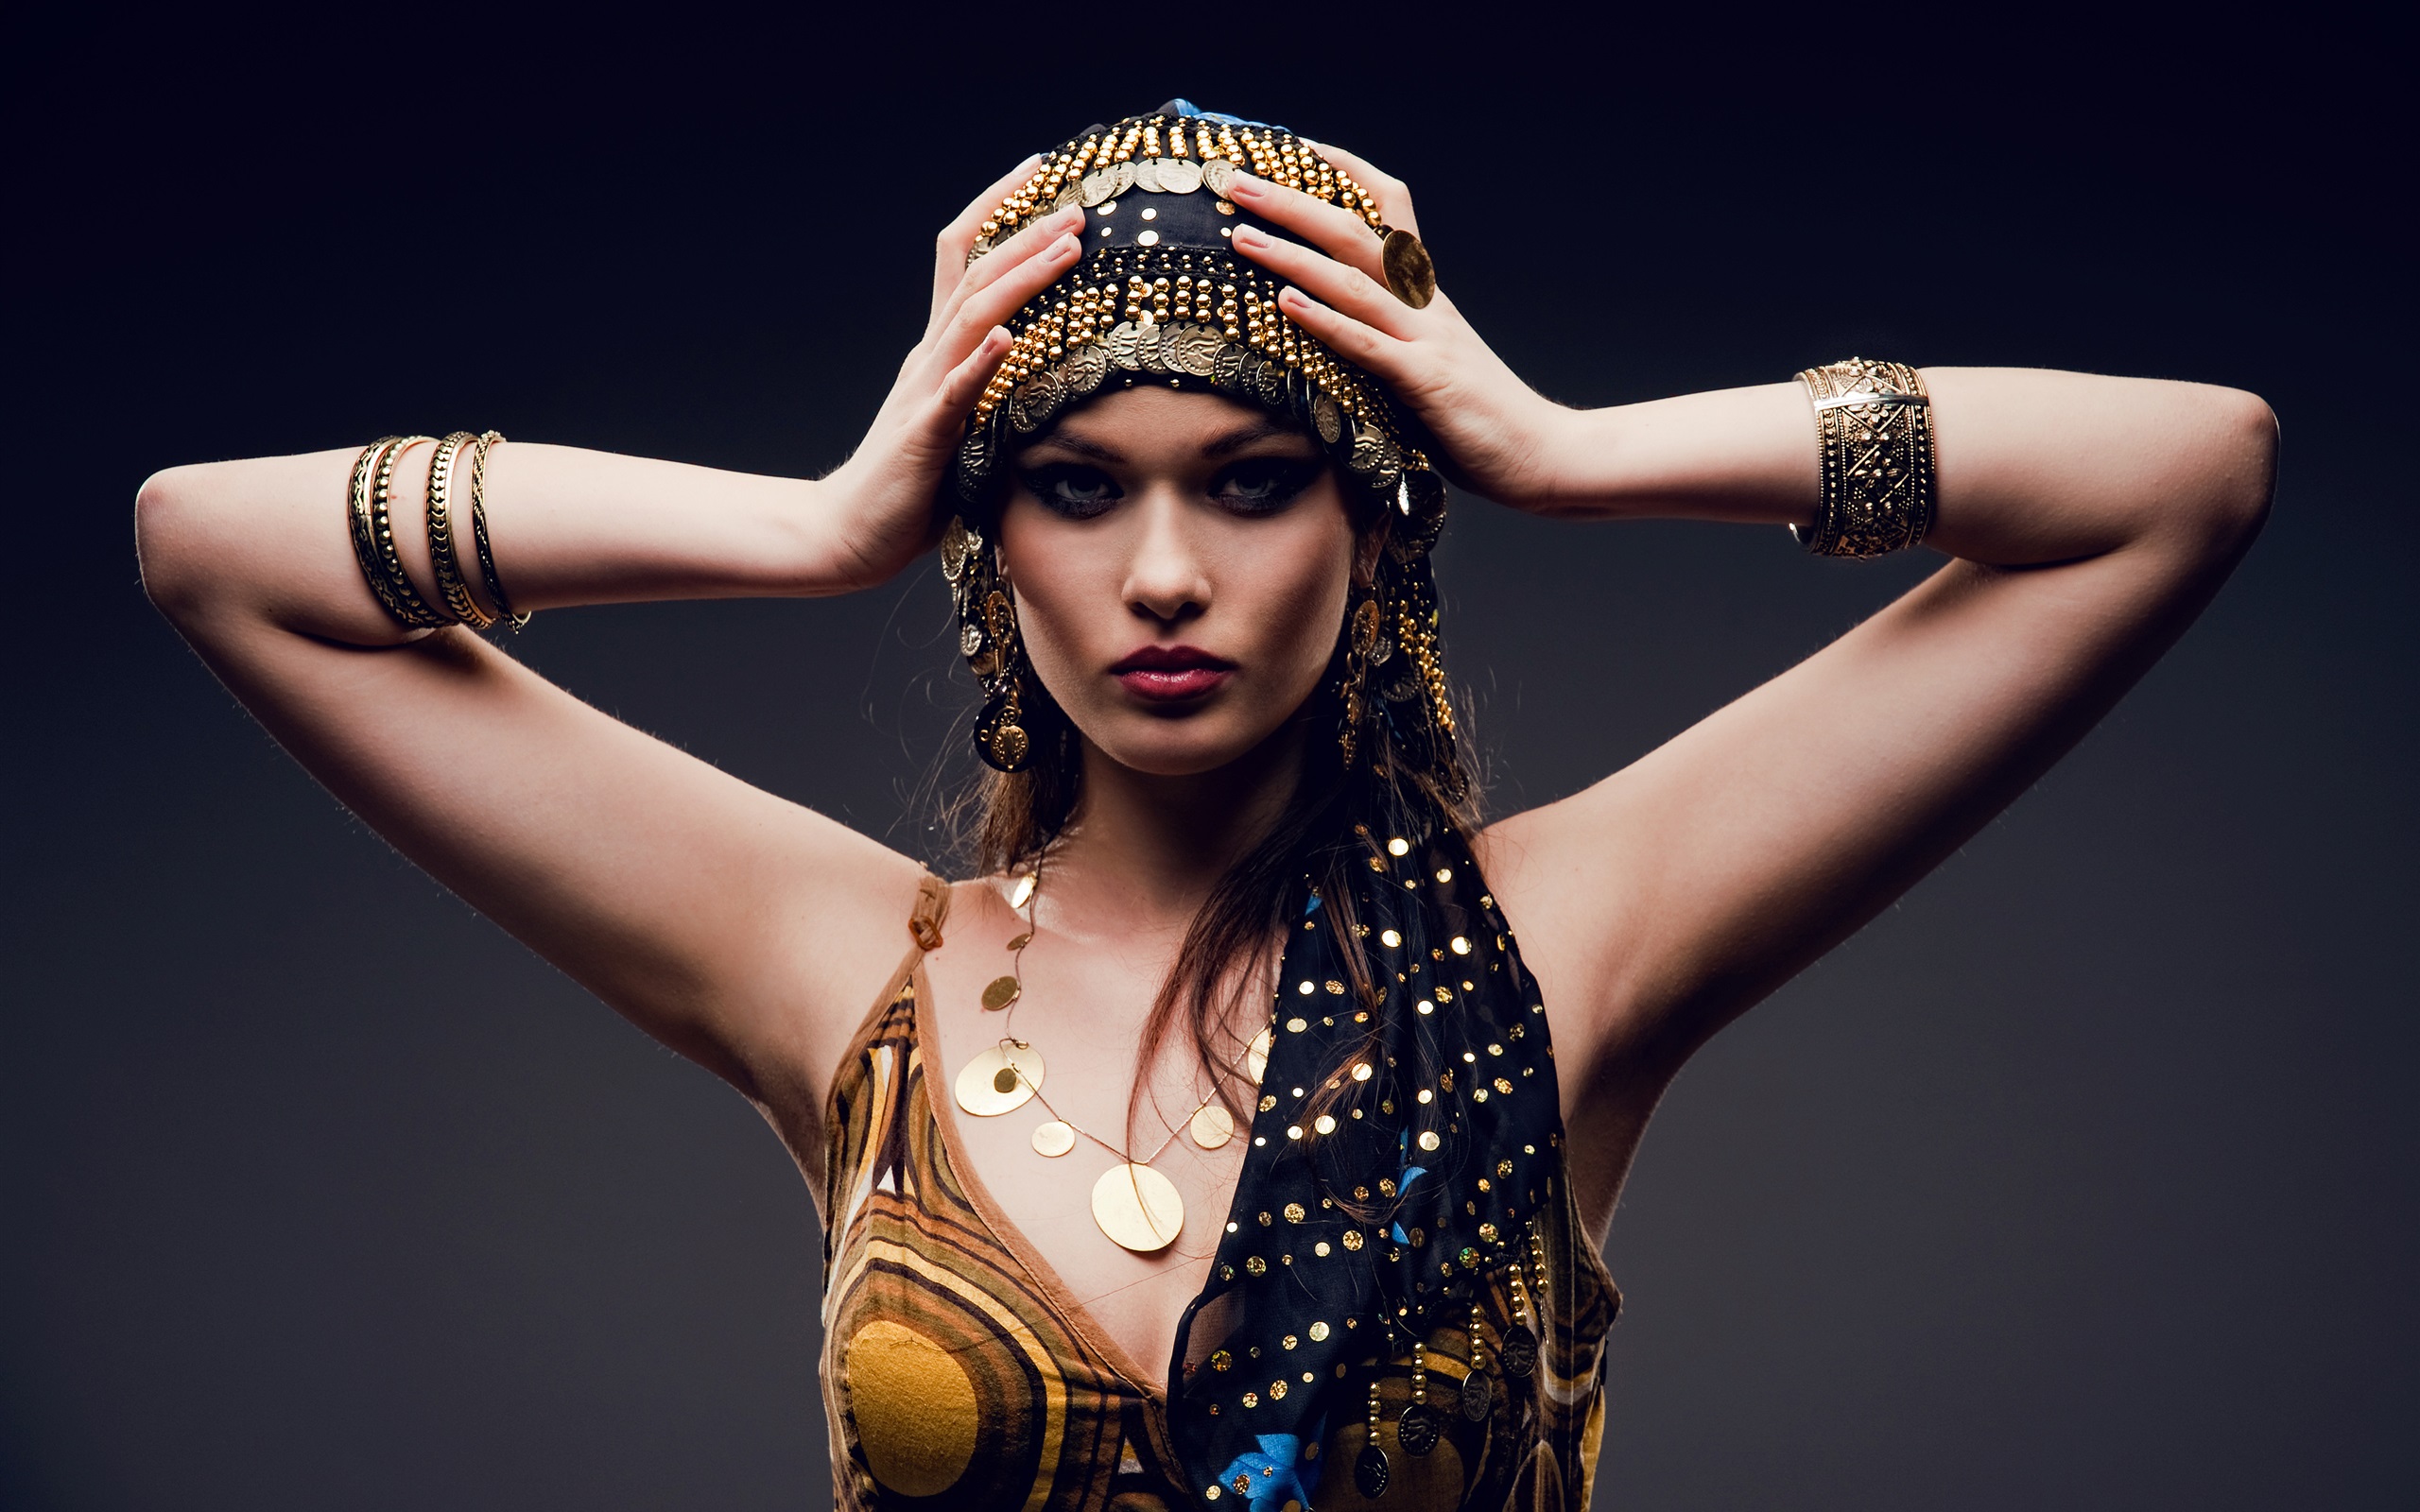 Free Download Wallpaper Arab Dress Sexy Girl X Uhd K Picture Image X For Your